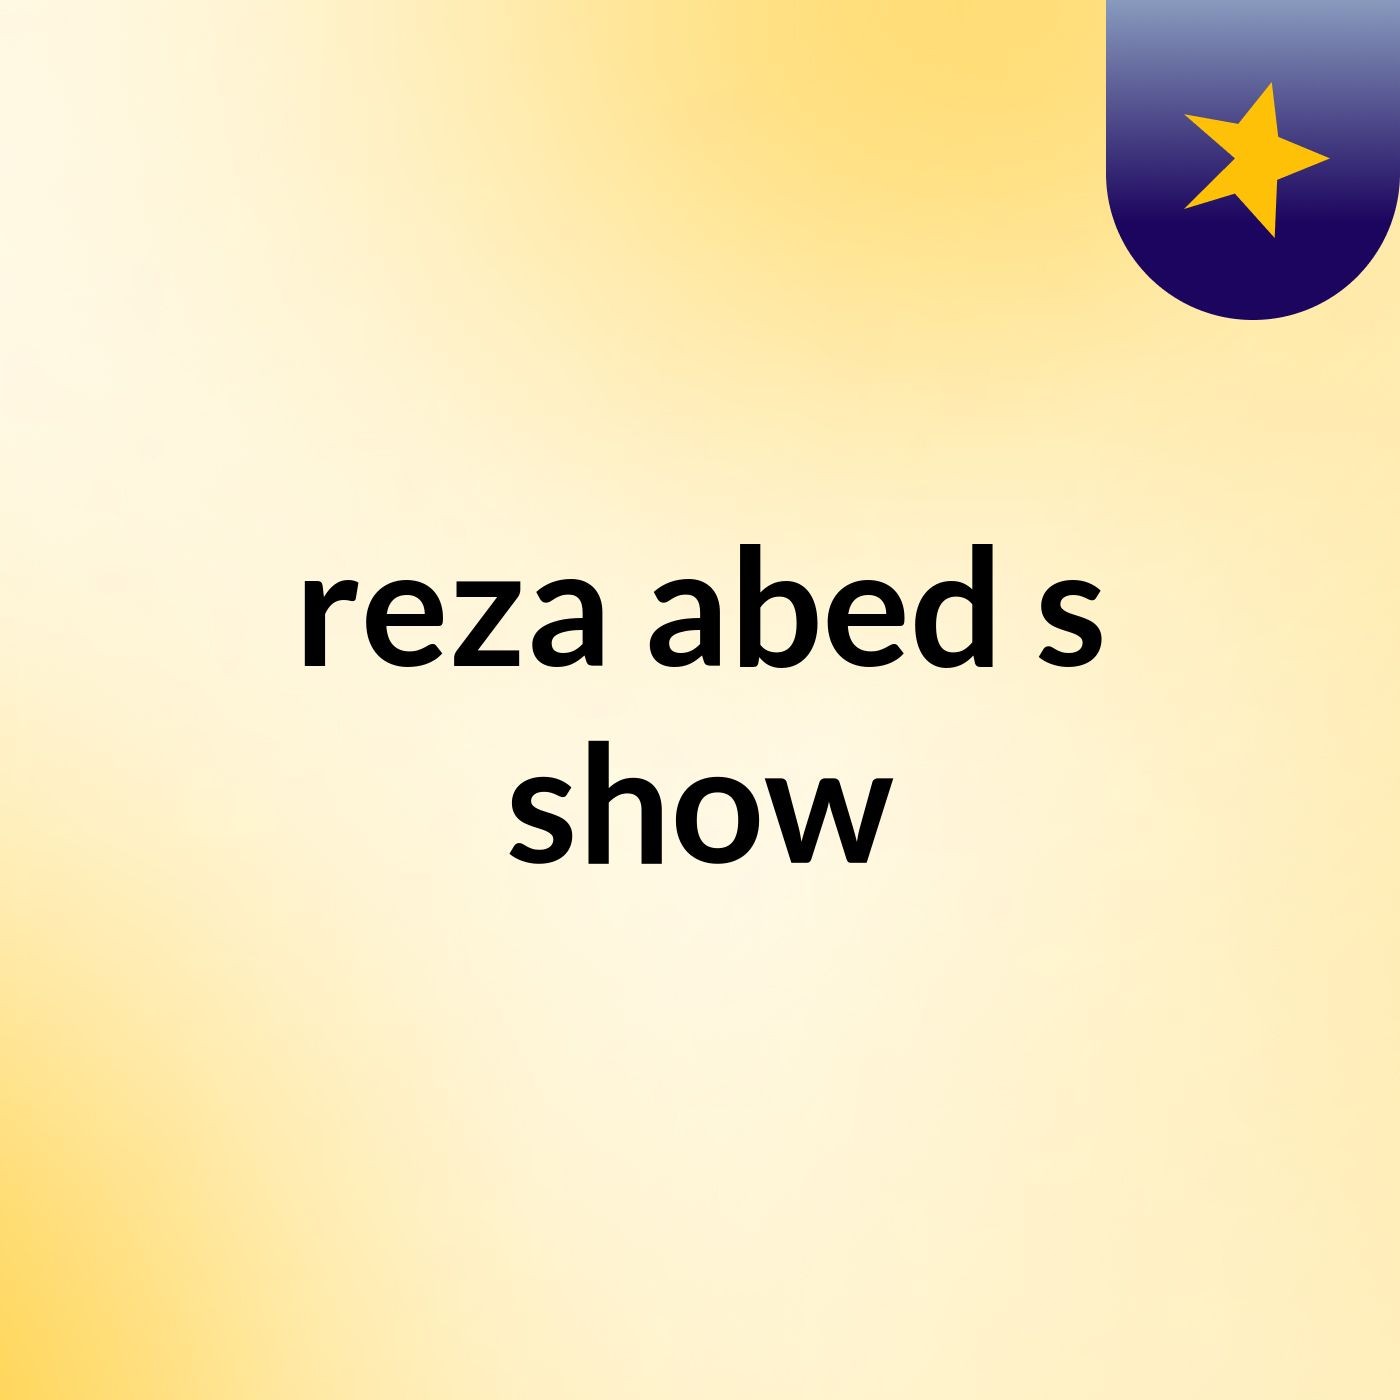 reza abed's show